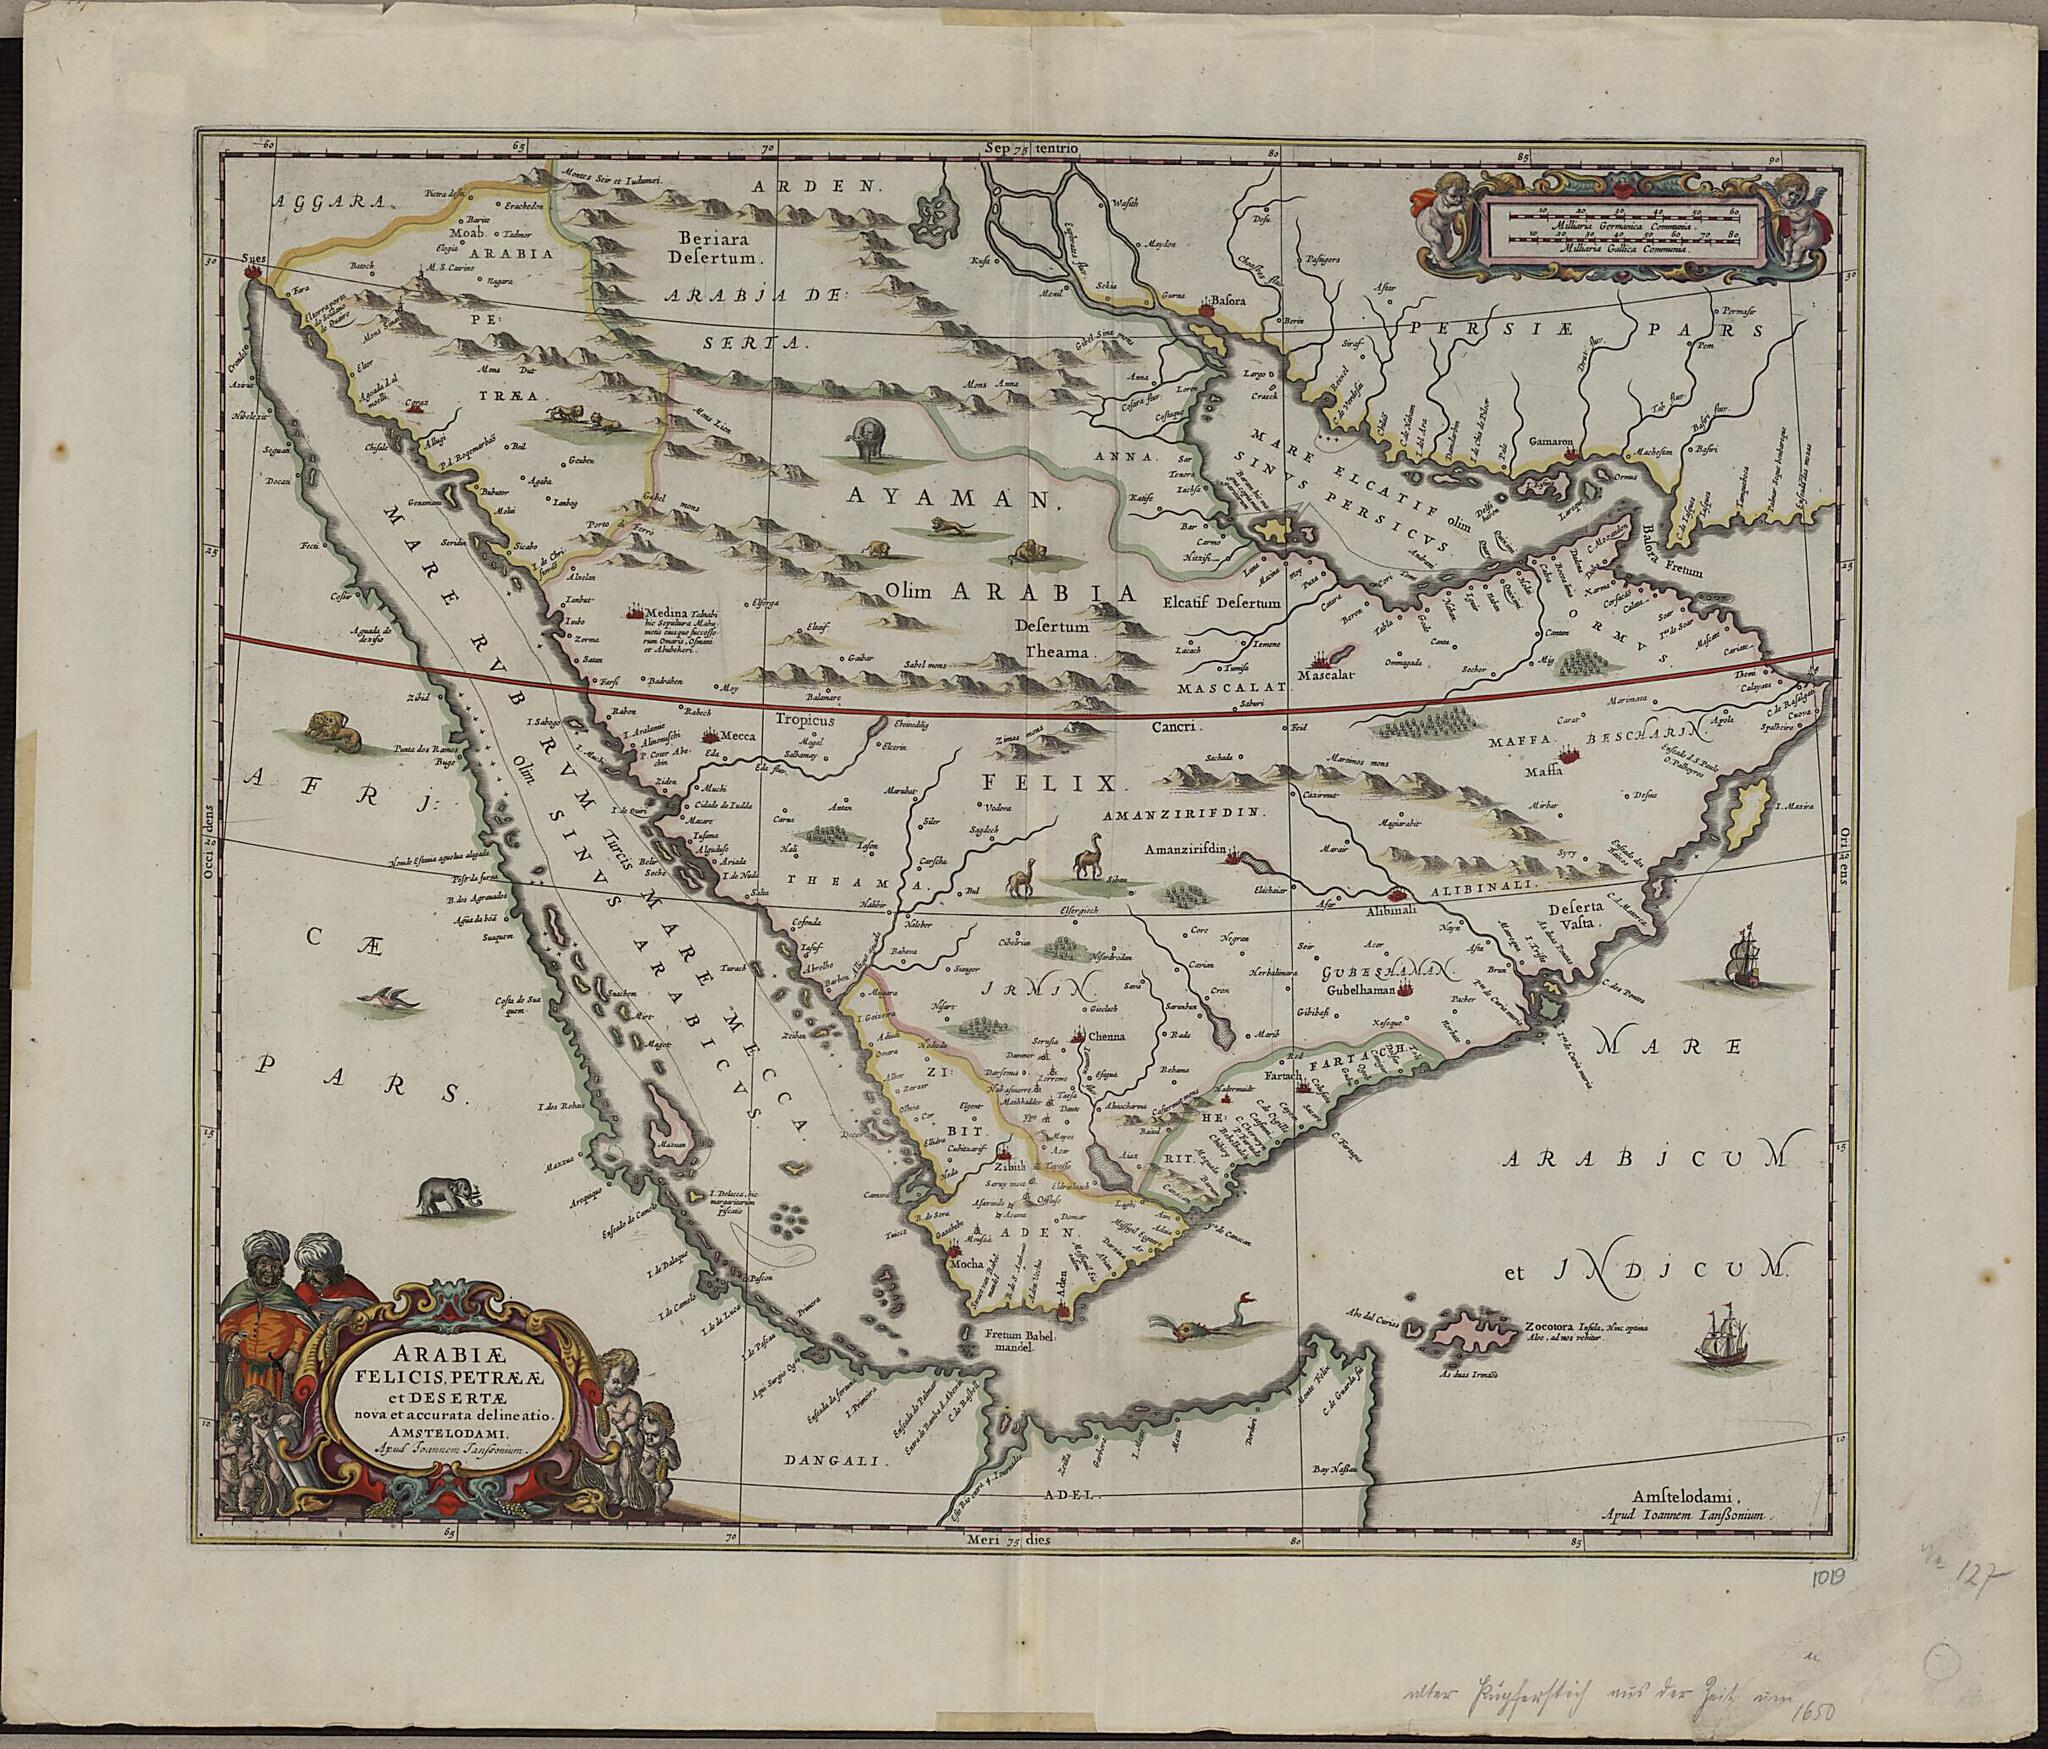 This old map of A Current and Correct Depiction of Arabia Felix, Arabia Petraea, and Arabia Deserta. (Arabie Felicis, Petraeae Et Desertae Nova Et Accurata Delineatio) from 1658 was created by Jan Jansson in 1658